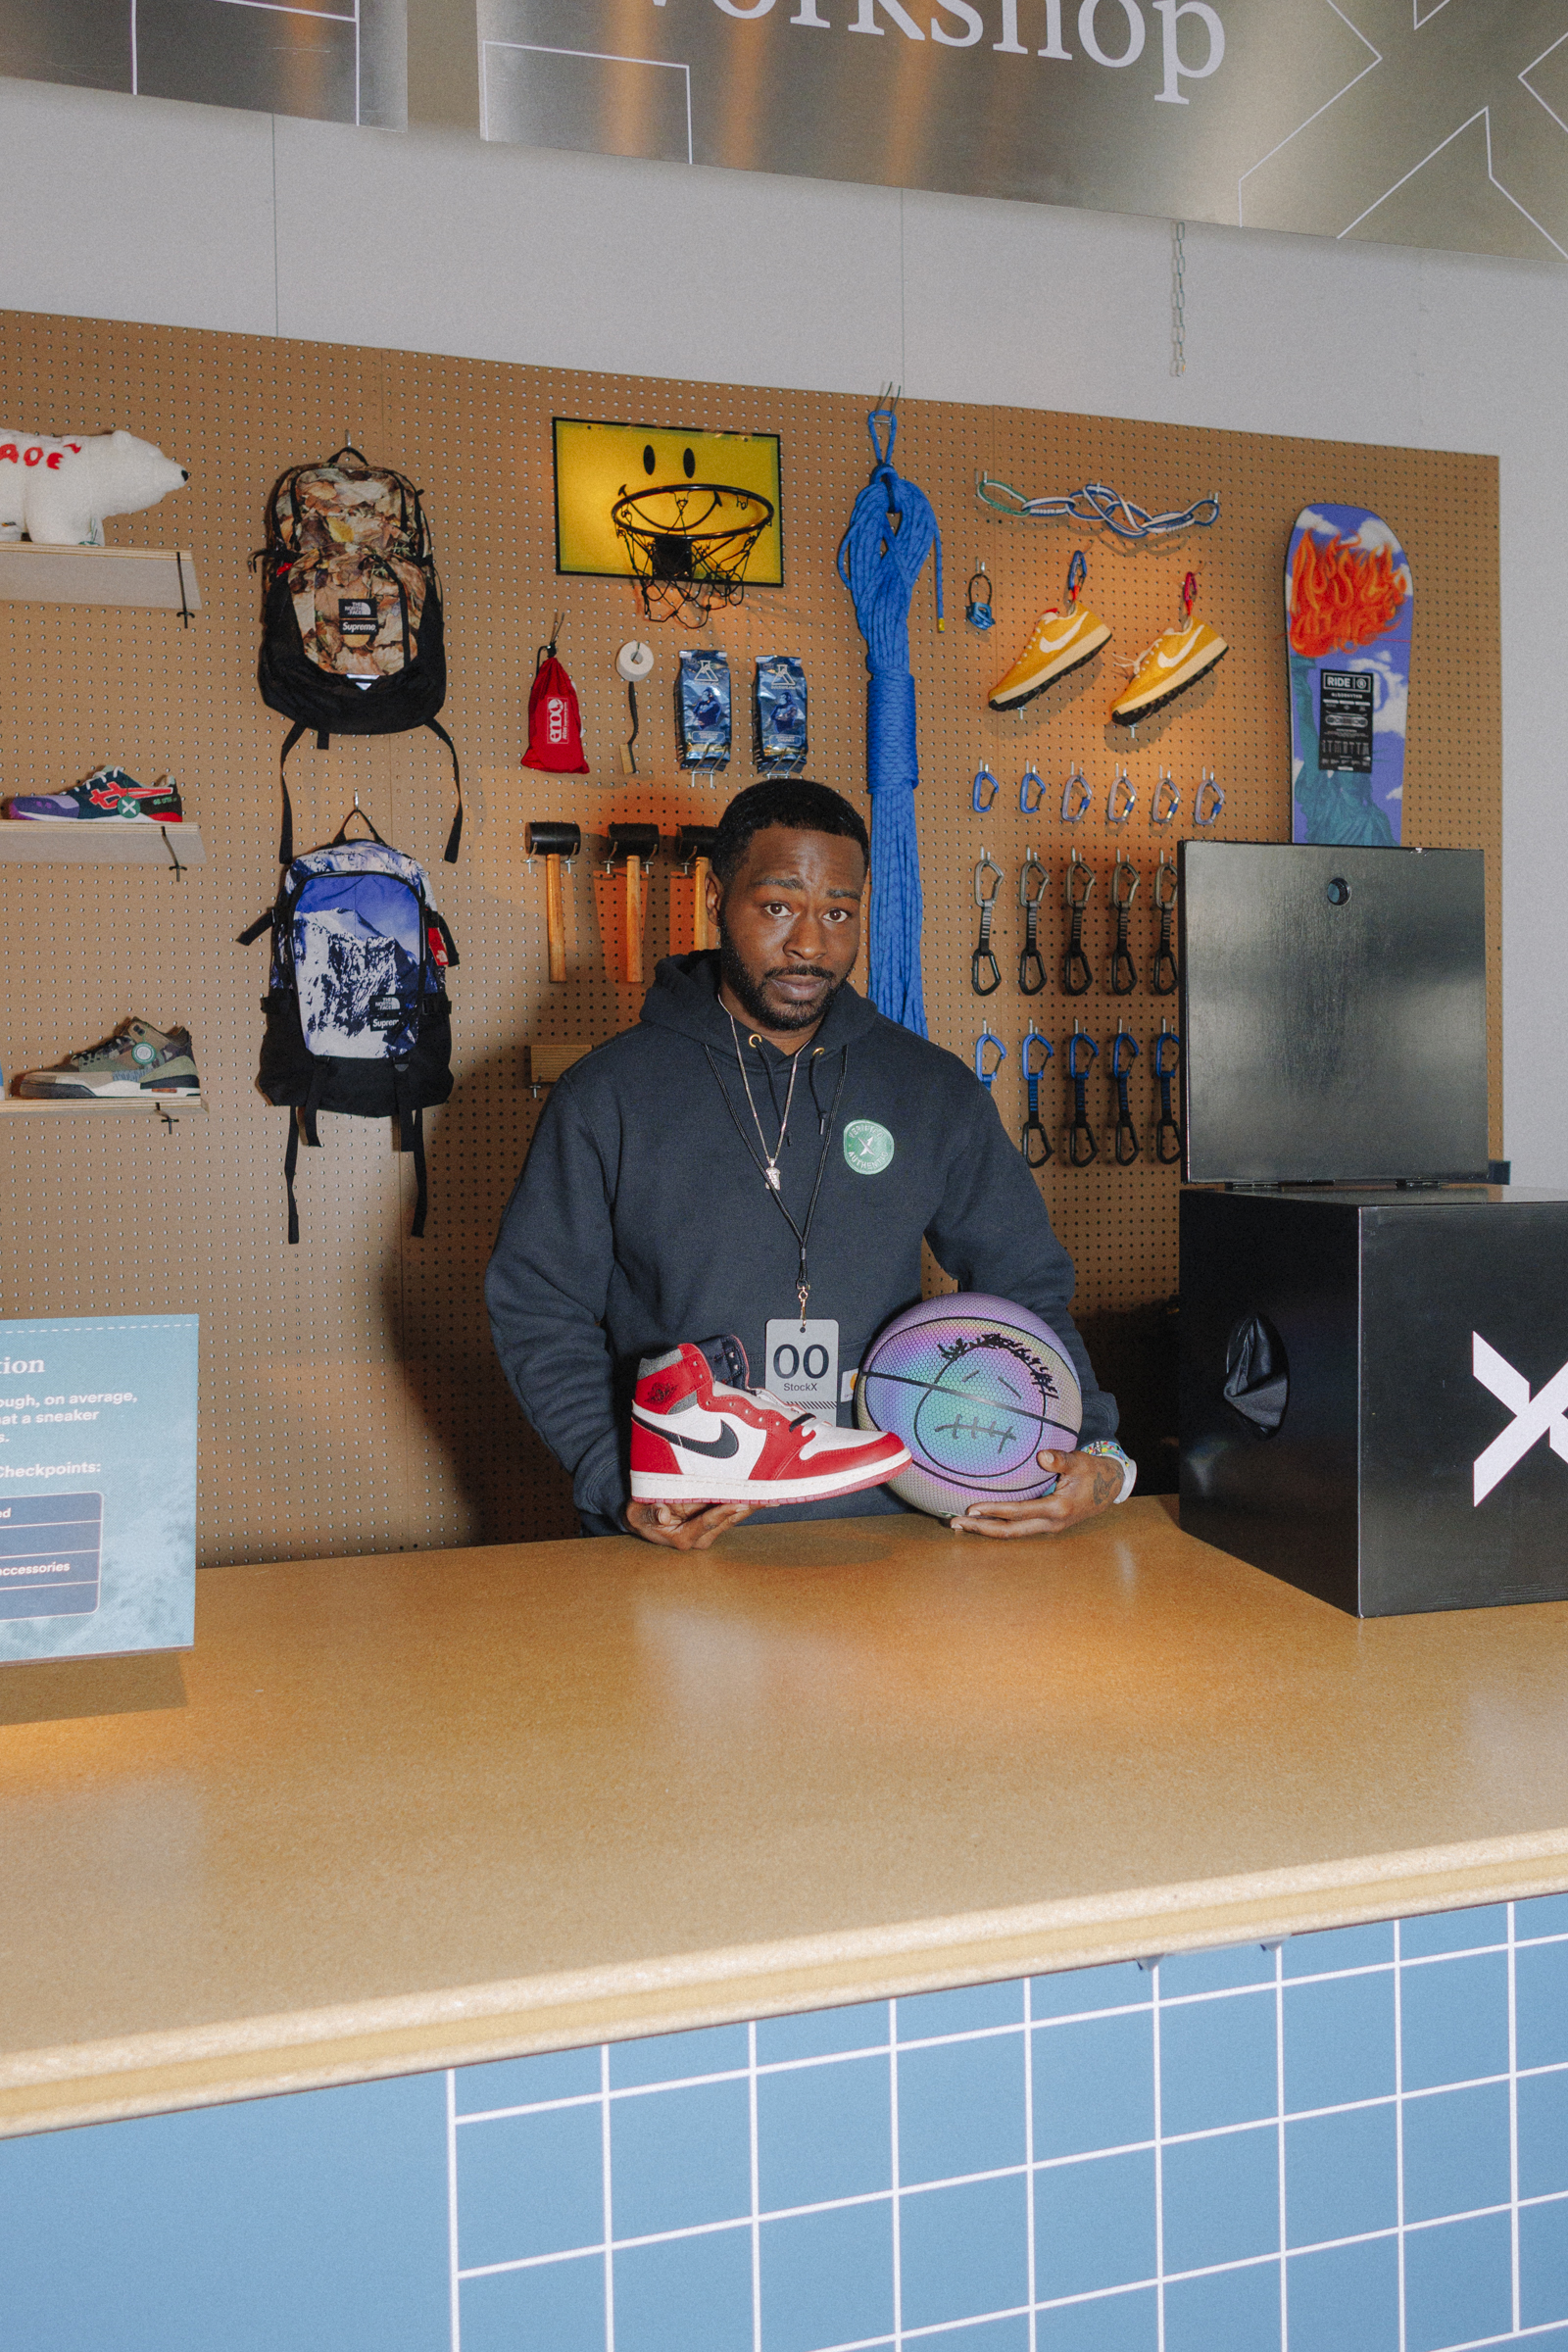 A Look Back at the StockX Off the Grid at All-Star Weekend